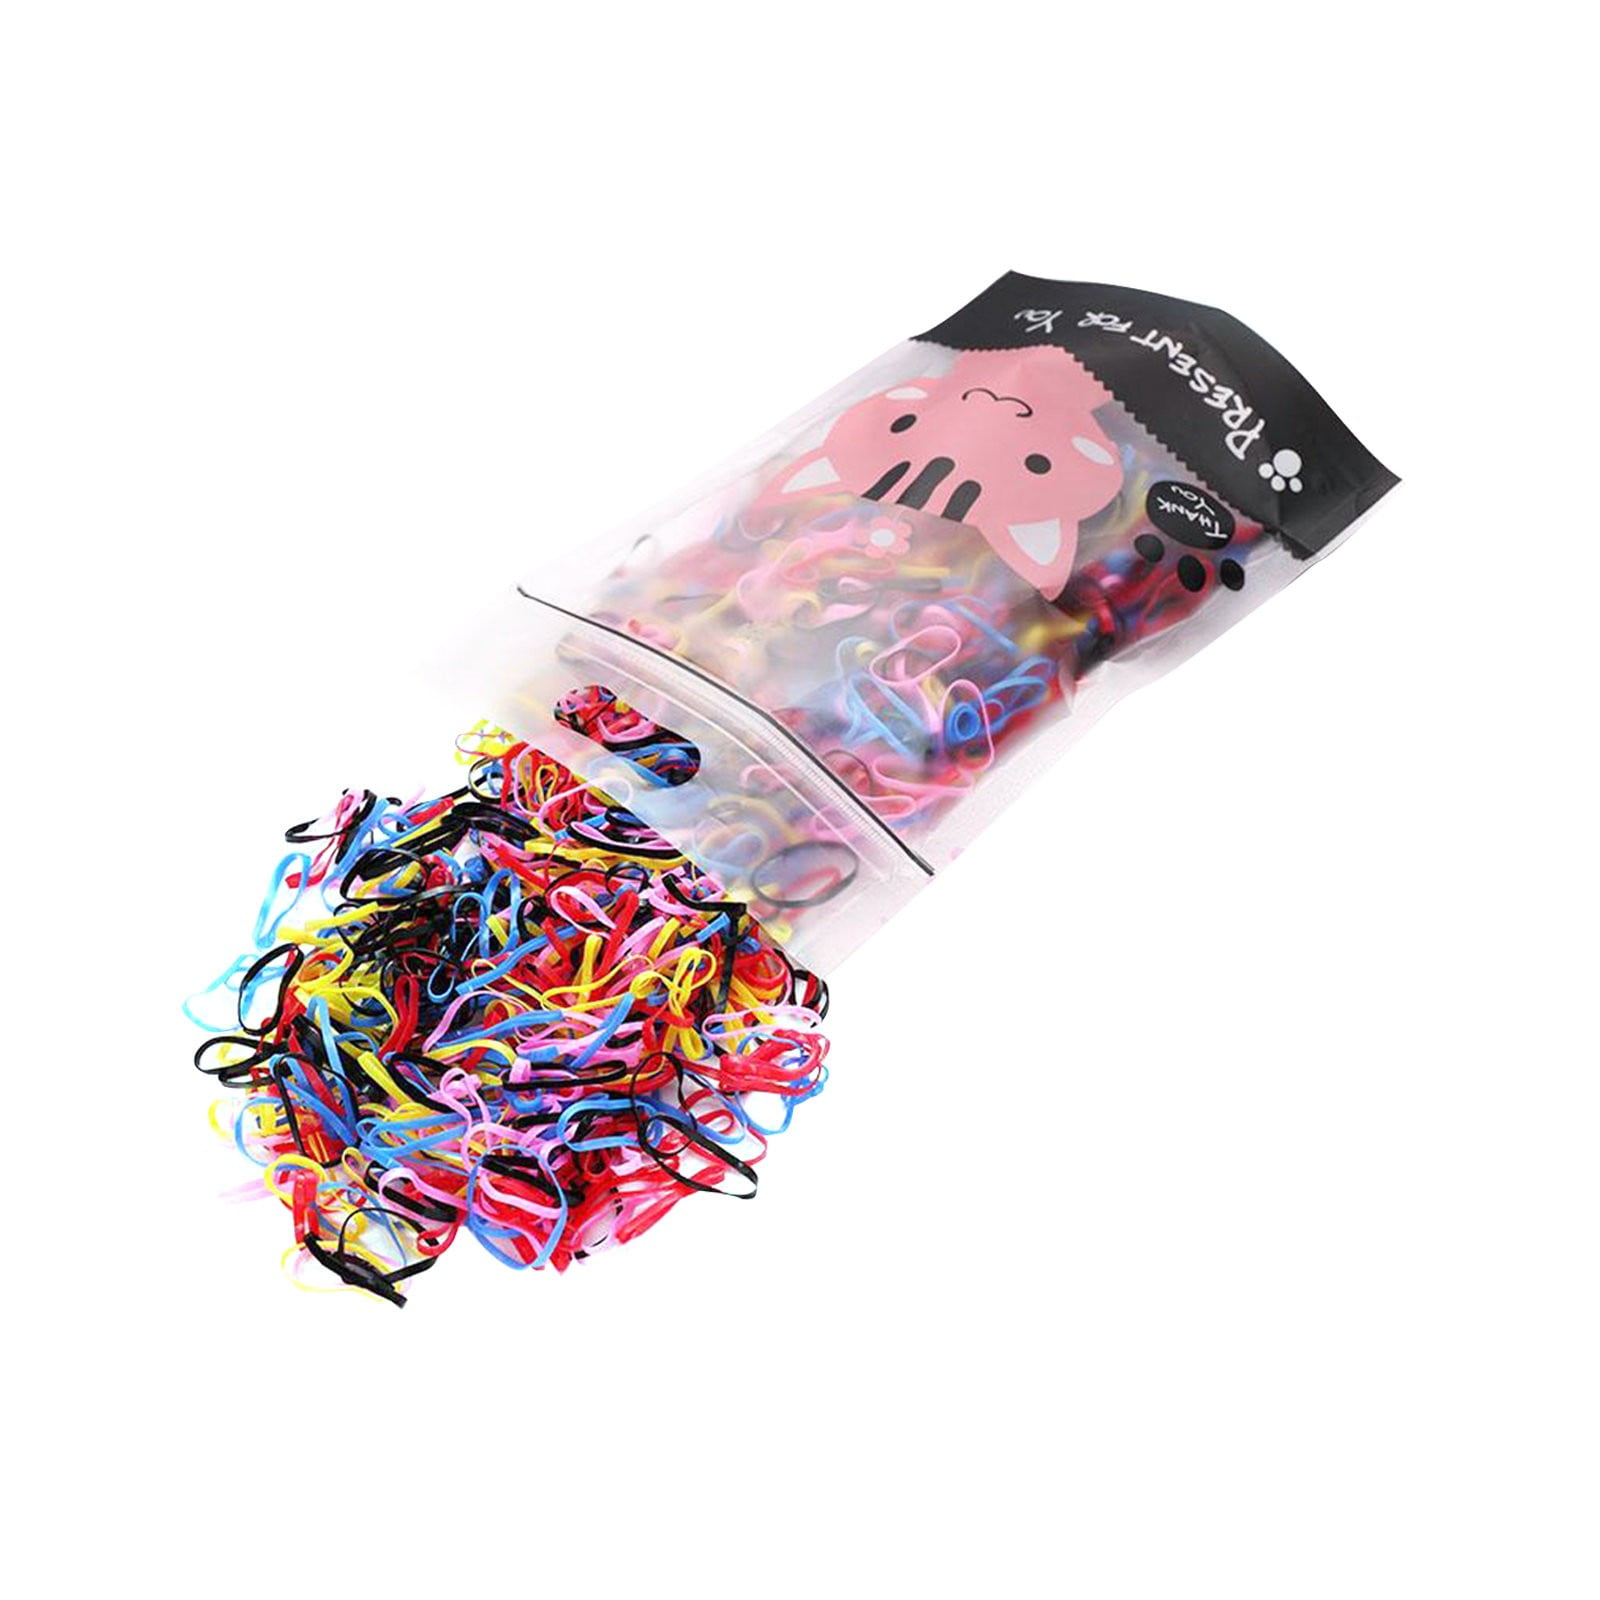 HSMQHJWE Scrunchies Pack Colorful Rubber Band Kids Girl Colorful